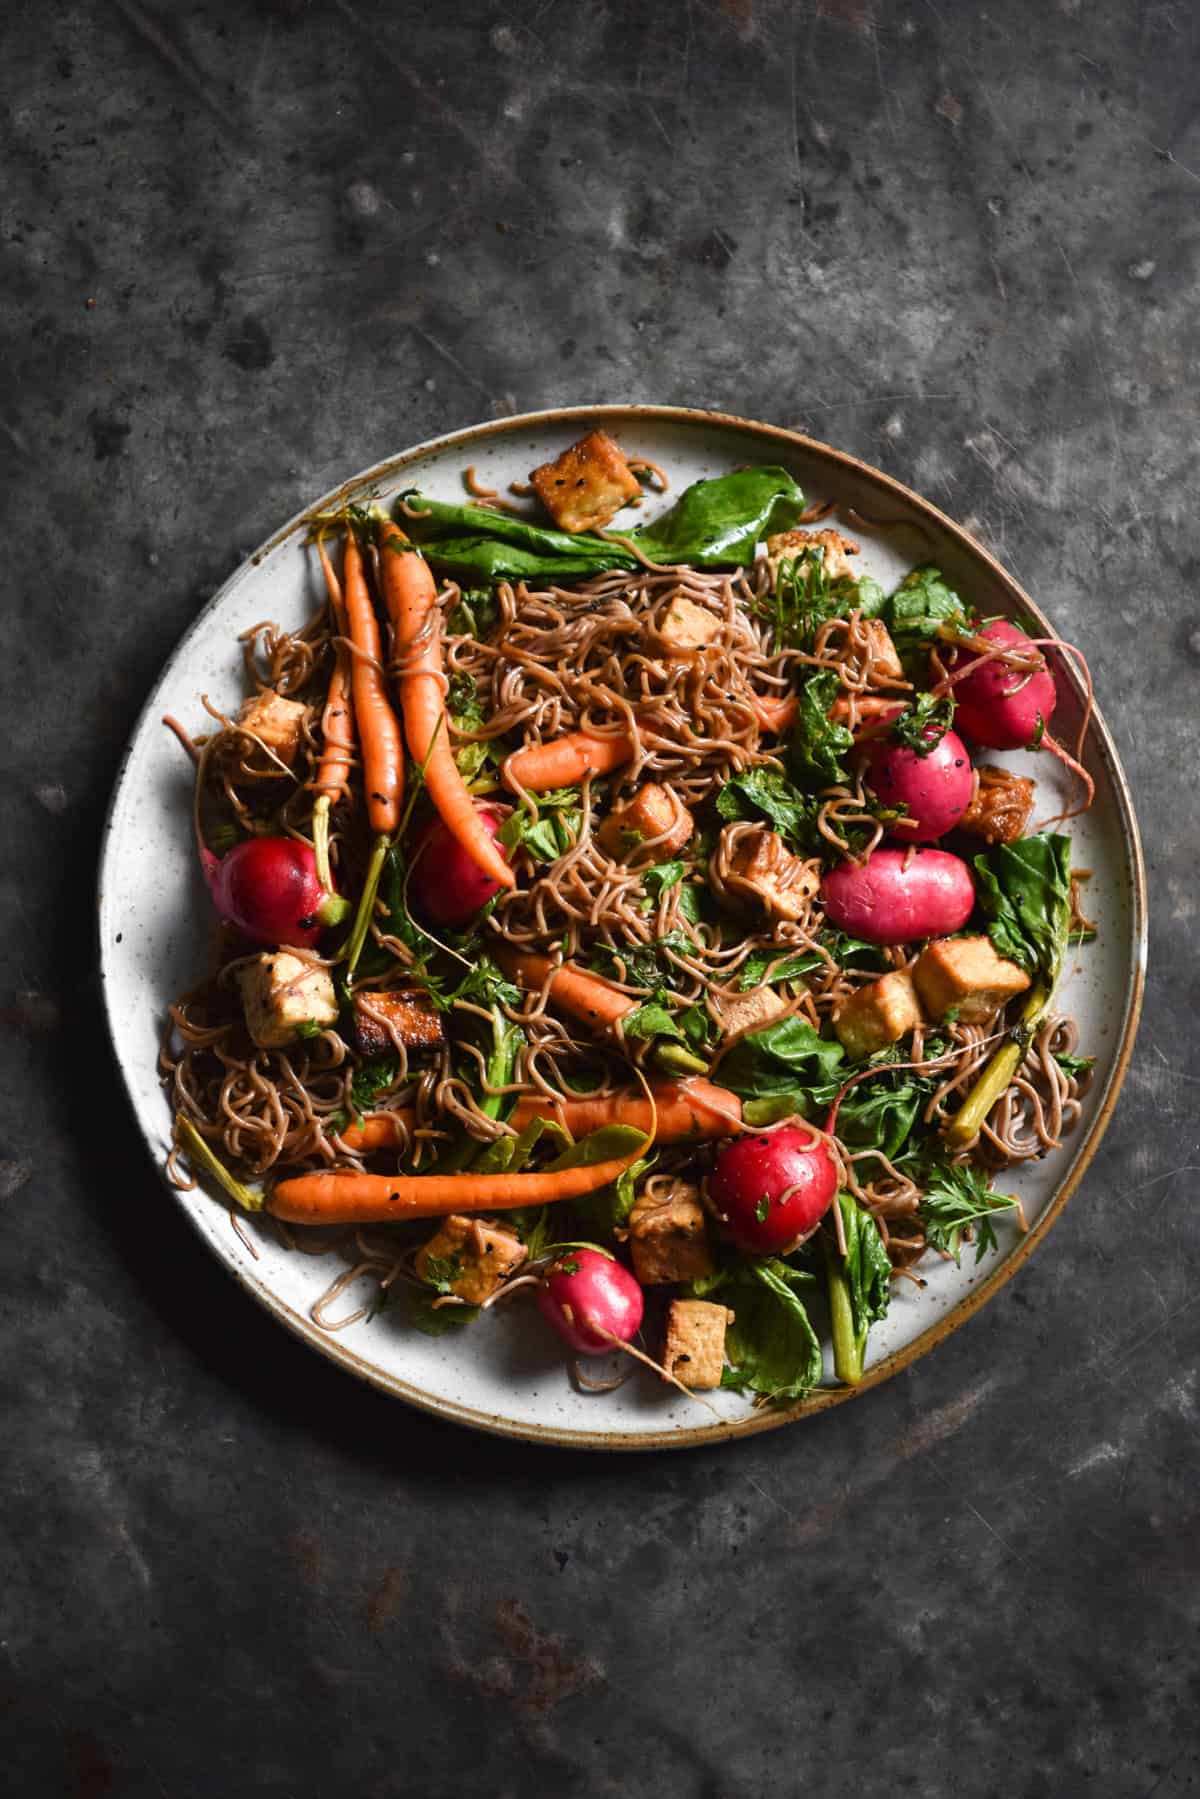 An aerial image of sweet and sticky buckwheat noodles with tofu, radishes, carrots and Asian greens on a white ceramic plate atop a dark blue steel backdrop.